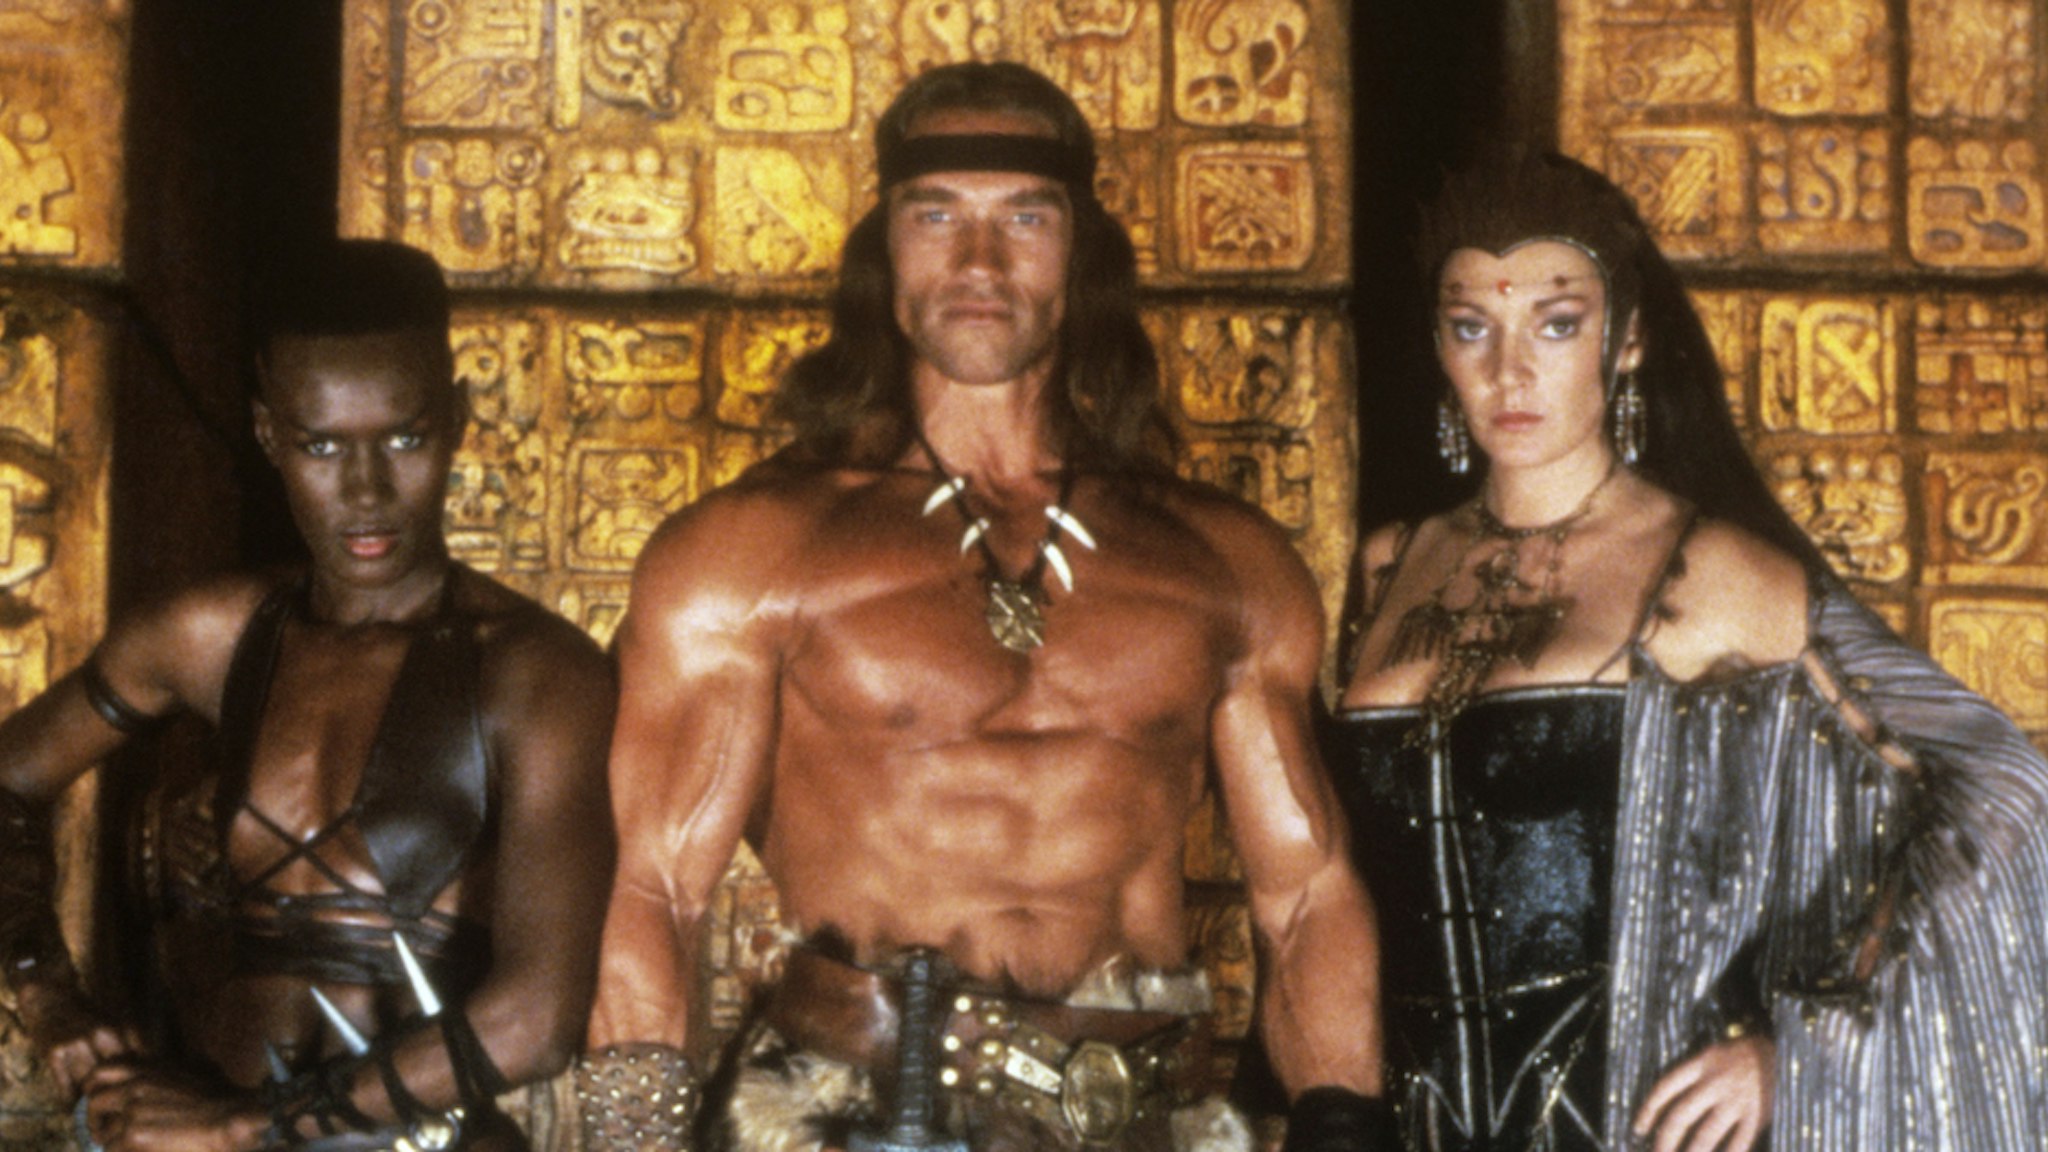 Austrian-born American actor, producer and politician Arnold Schwarzenegger, Jamaican singer, actress and model Grace Jones and British actress Sarah Douglas looking into the camera in the film Conan the Destroyer. Mexico, 1984 (Photo by Mondadori via Getty Images)